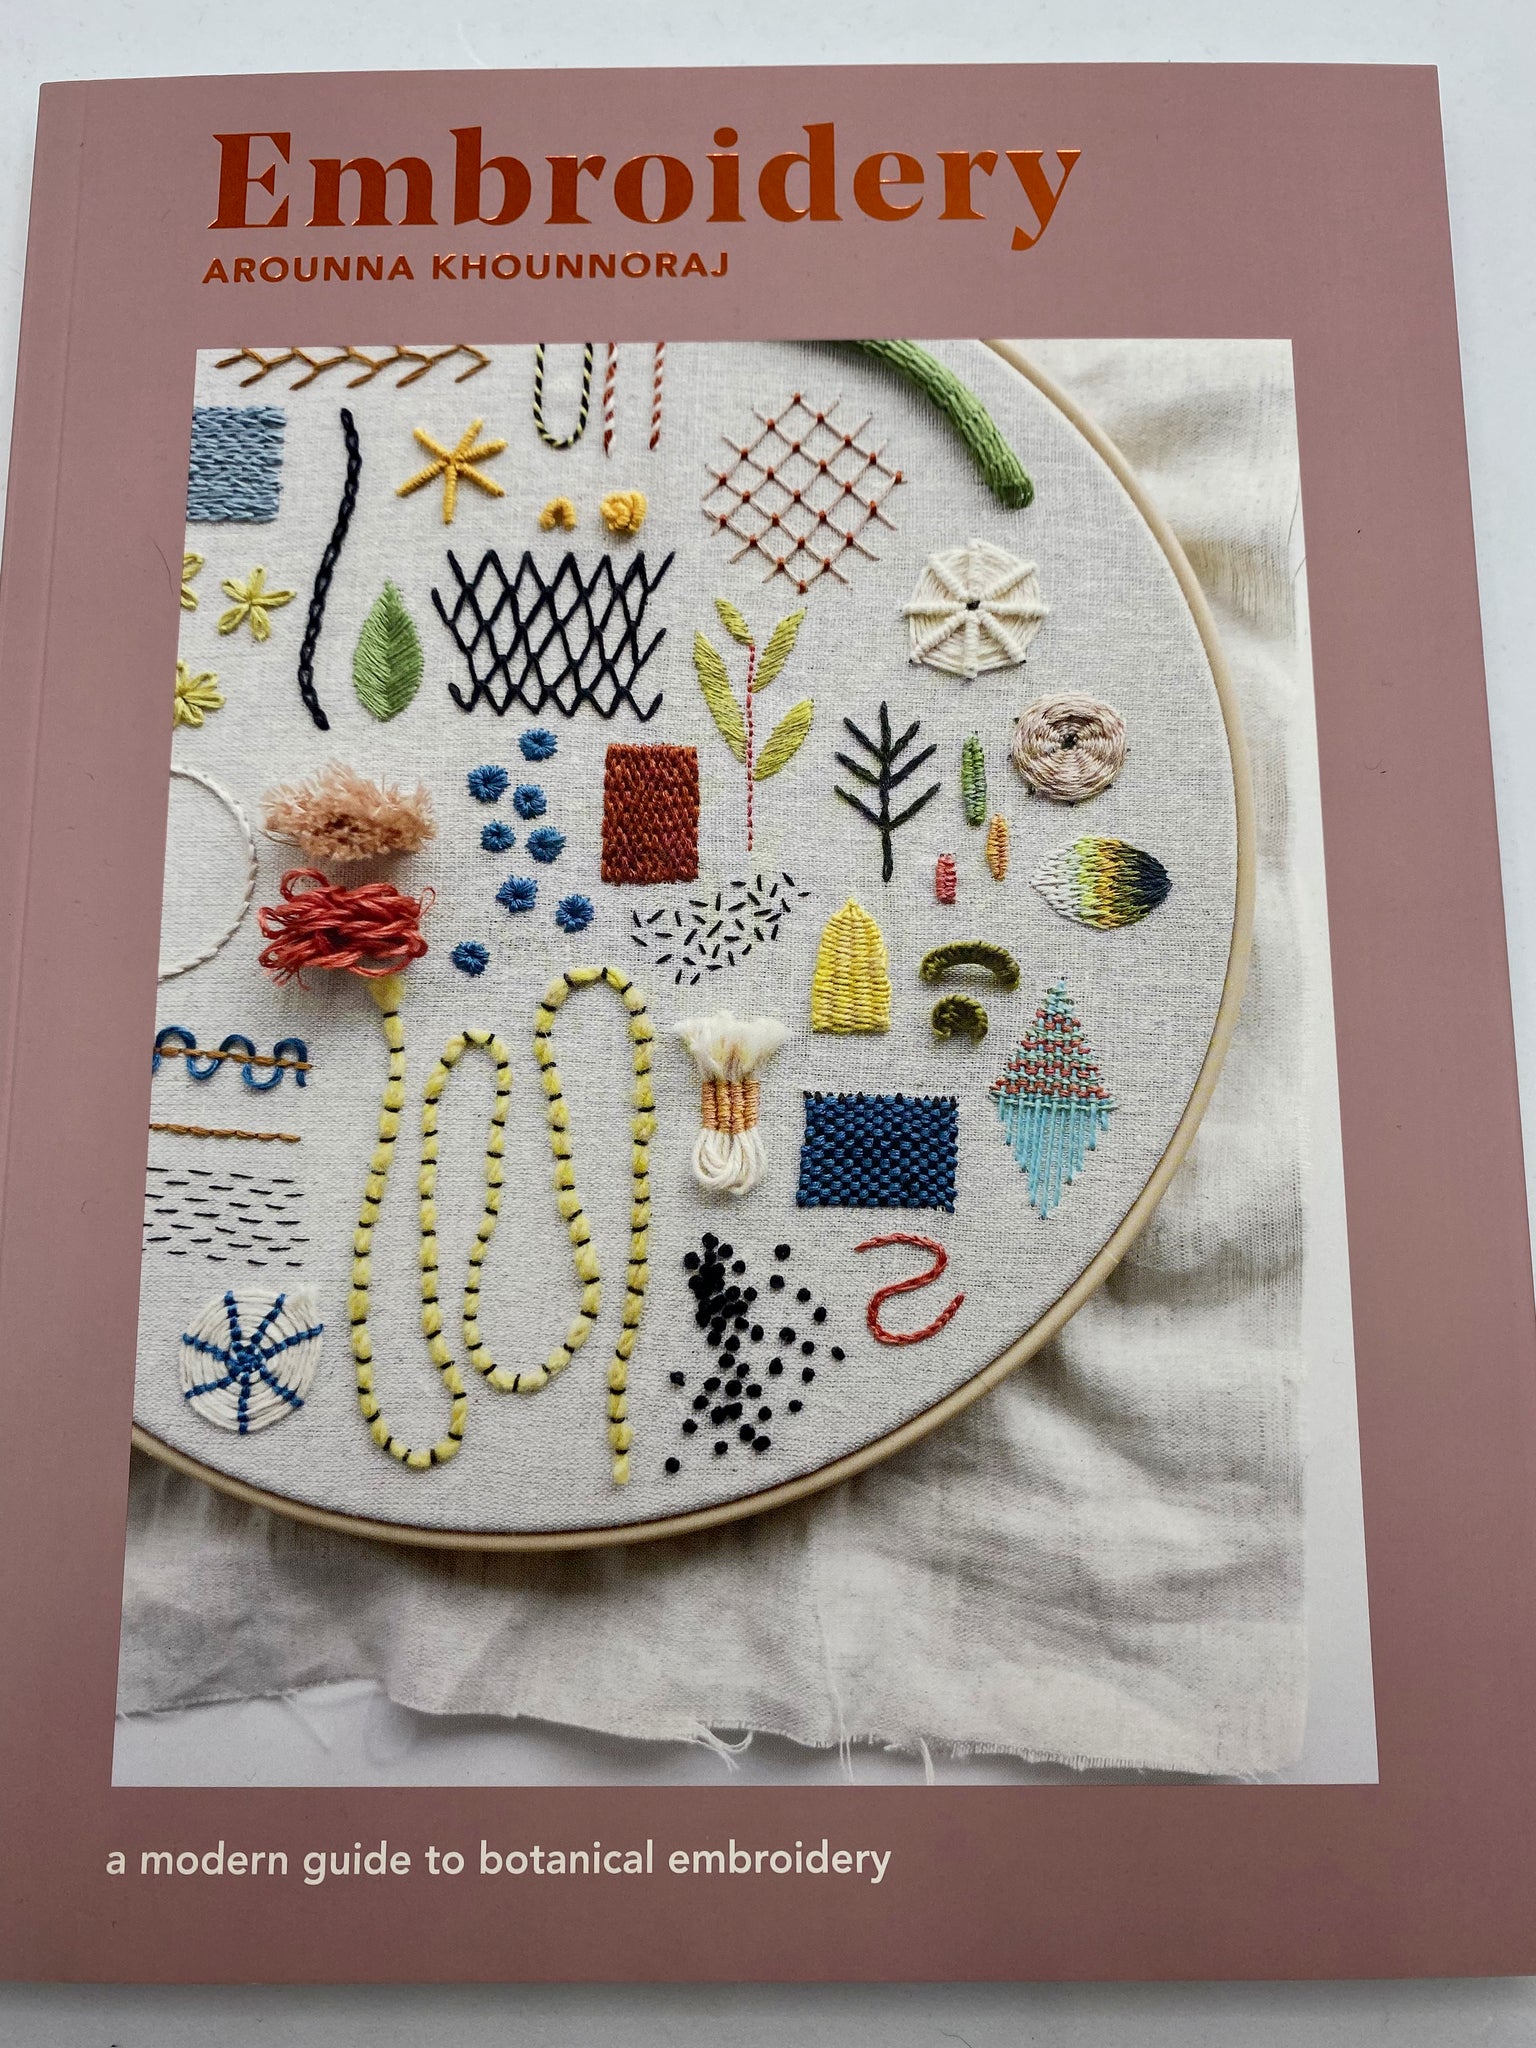 Embroidery Kit, Hand Embroidery Kit, Home Sweet Home, DIY Embroidery Kit,  Modern Embroidery, DIY Embroidery, Housewarming gift, Home — I Heart Stitch  Art: Beginner Embroidery Kits + Patterns